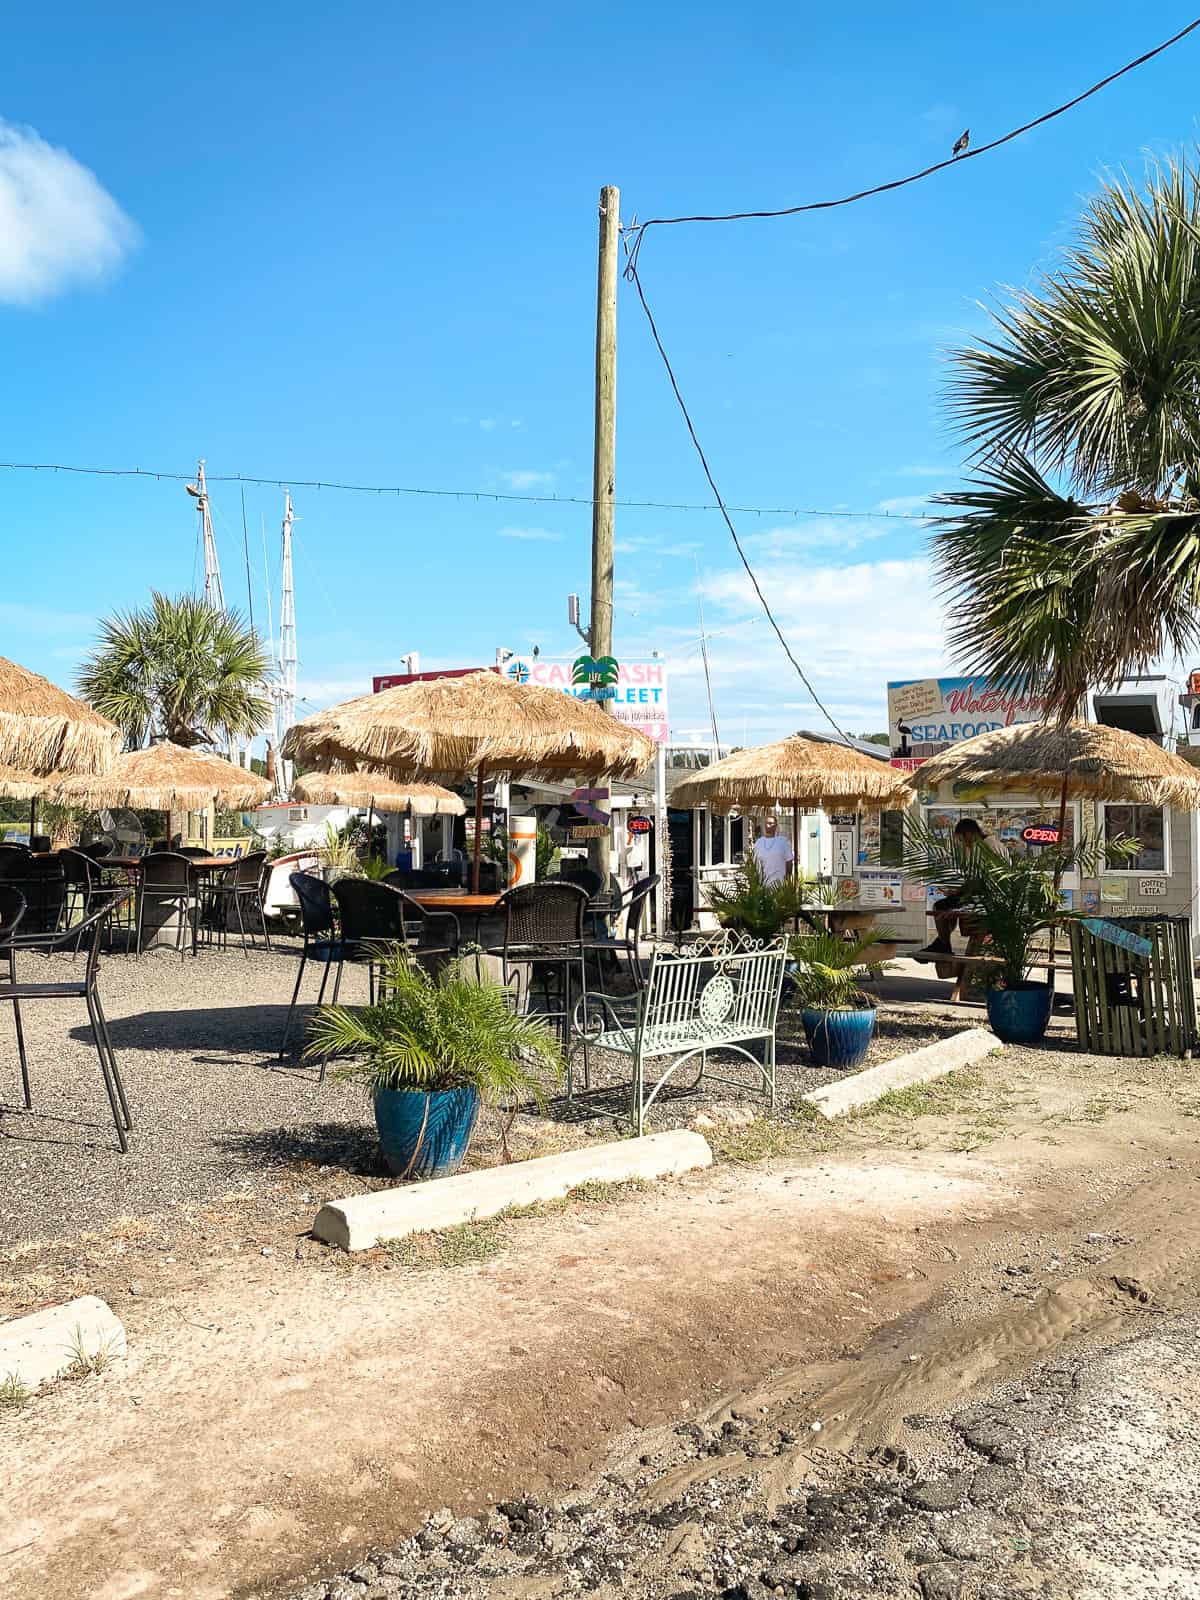 An outdoor beachy restaurant with palm trees on a sunny day